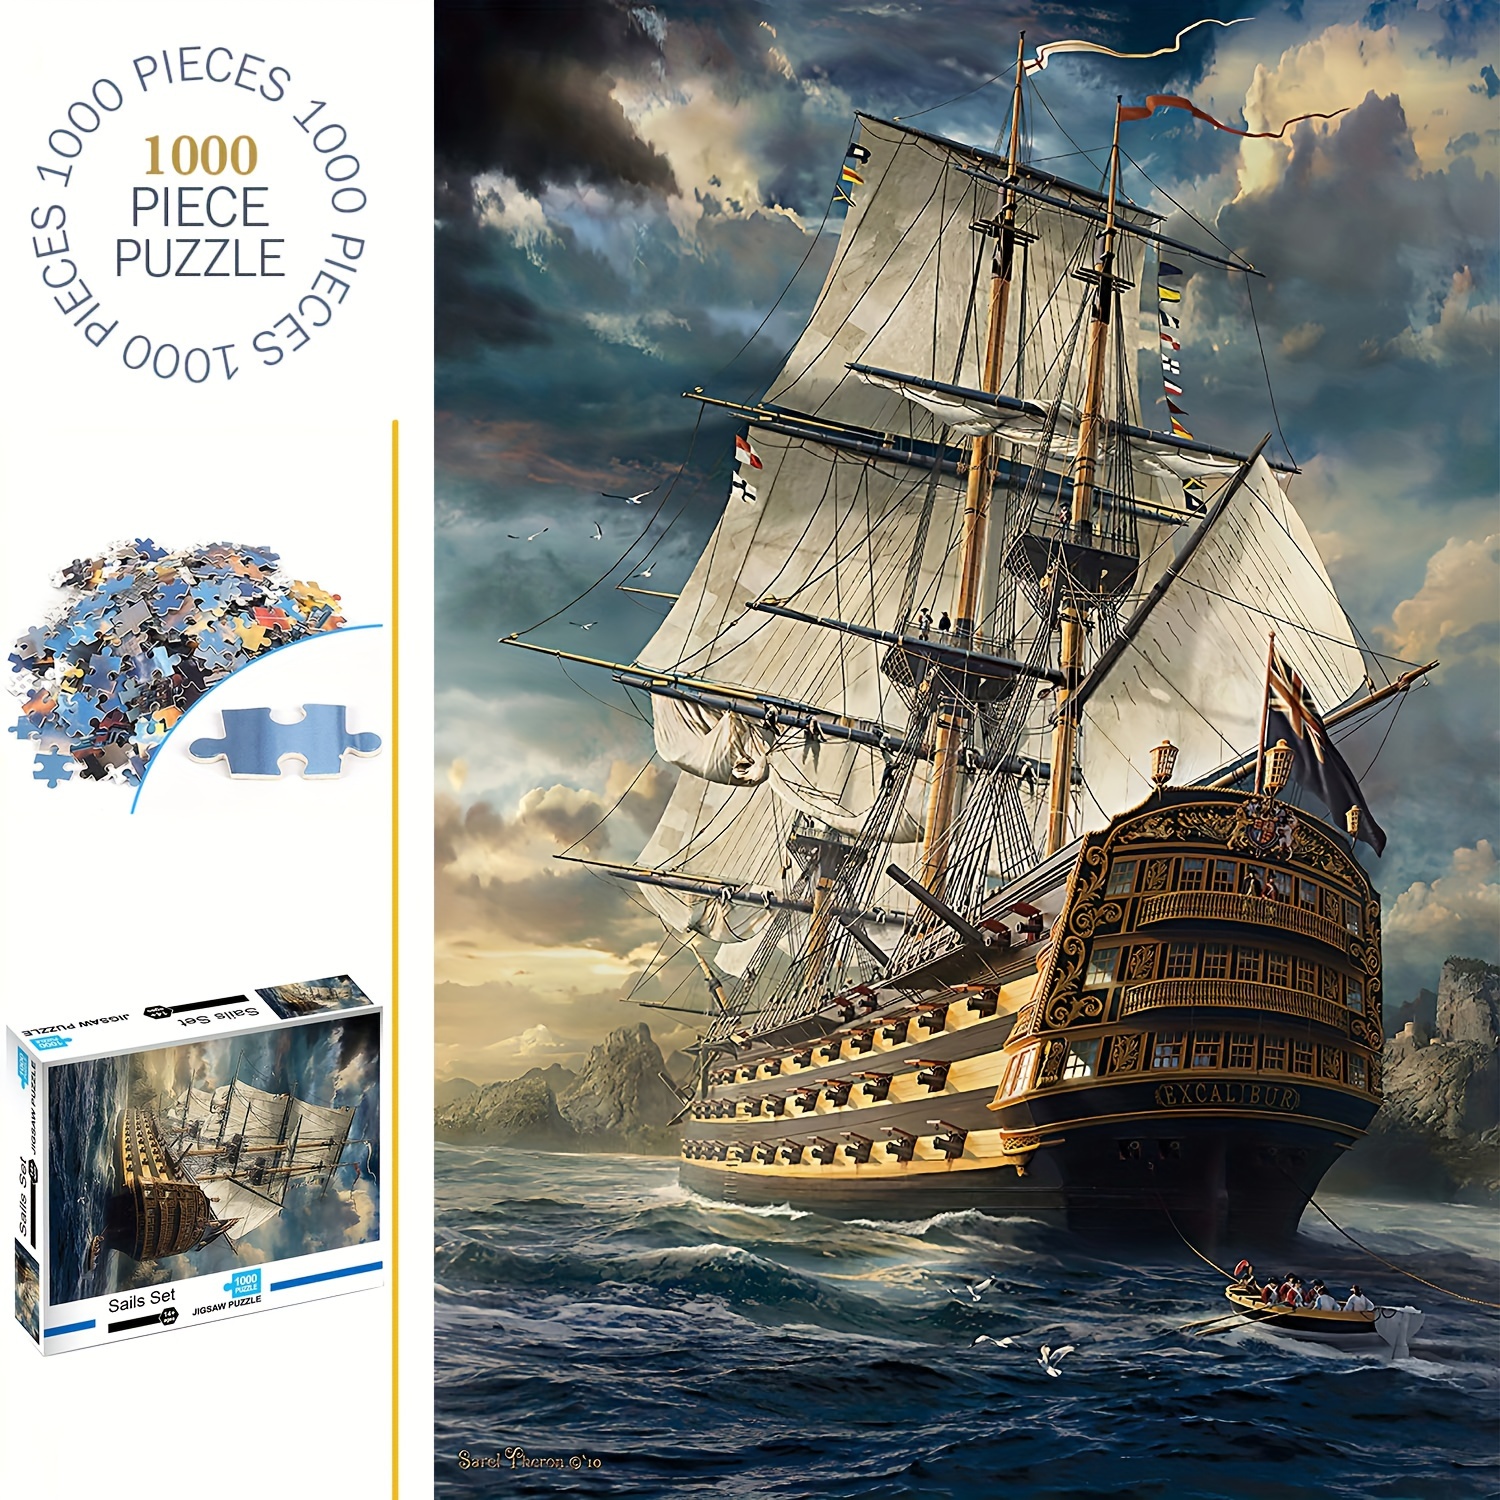 

1000pcs Sails Set Puzzles, Thick And Durable Seamless Jigsaw Puzzles For Adults Premium Quality Fun Family Challenging Puzzles For Birthday, Christmas, Halloween, Thanksgiving, Easter